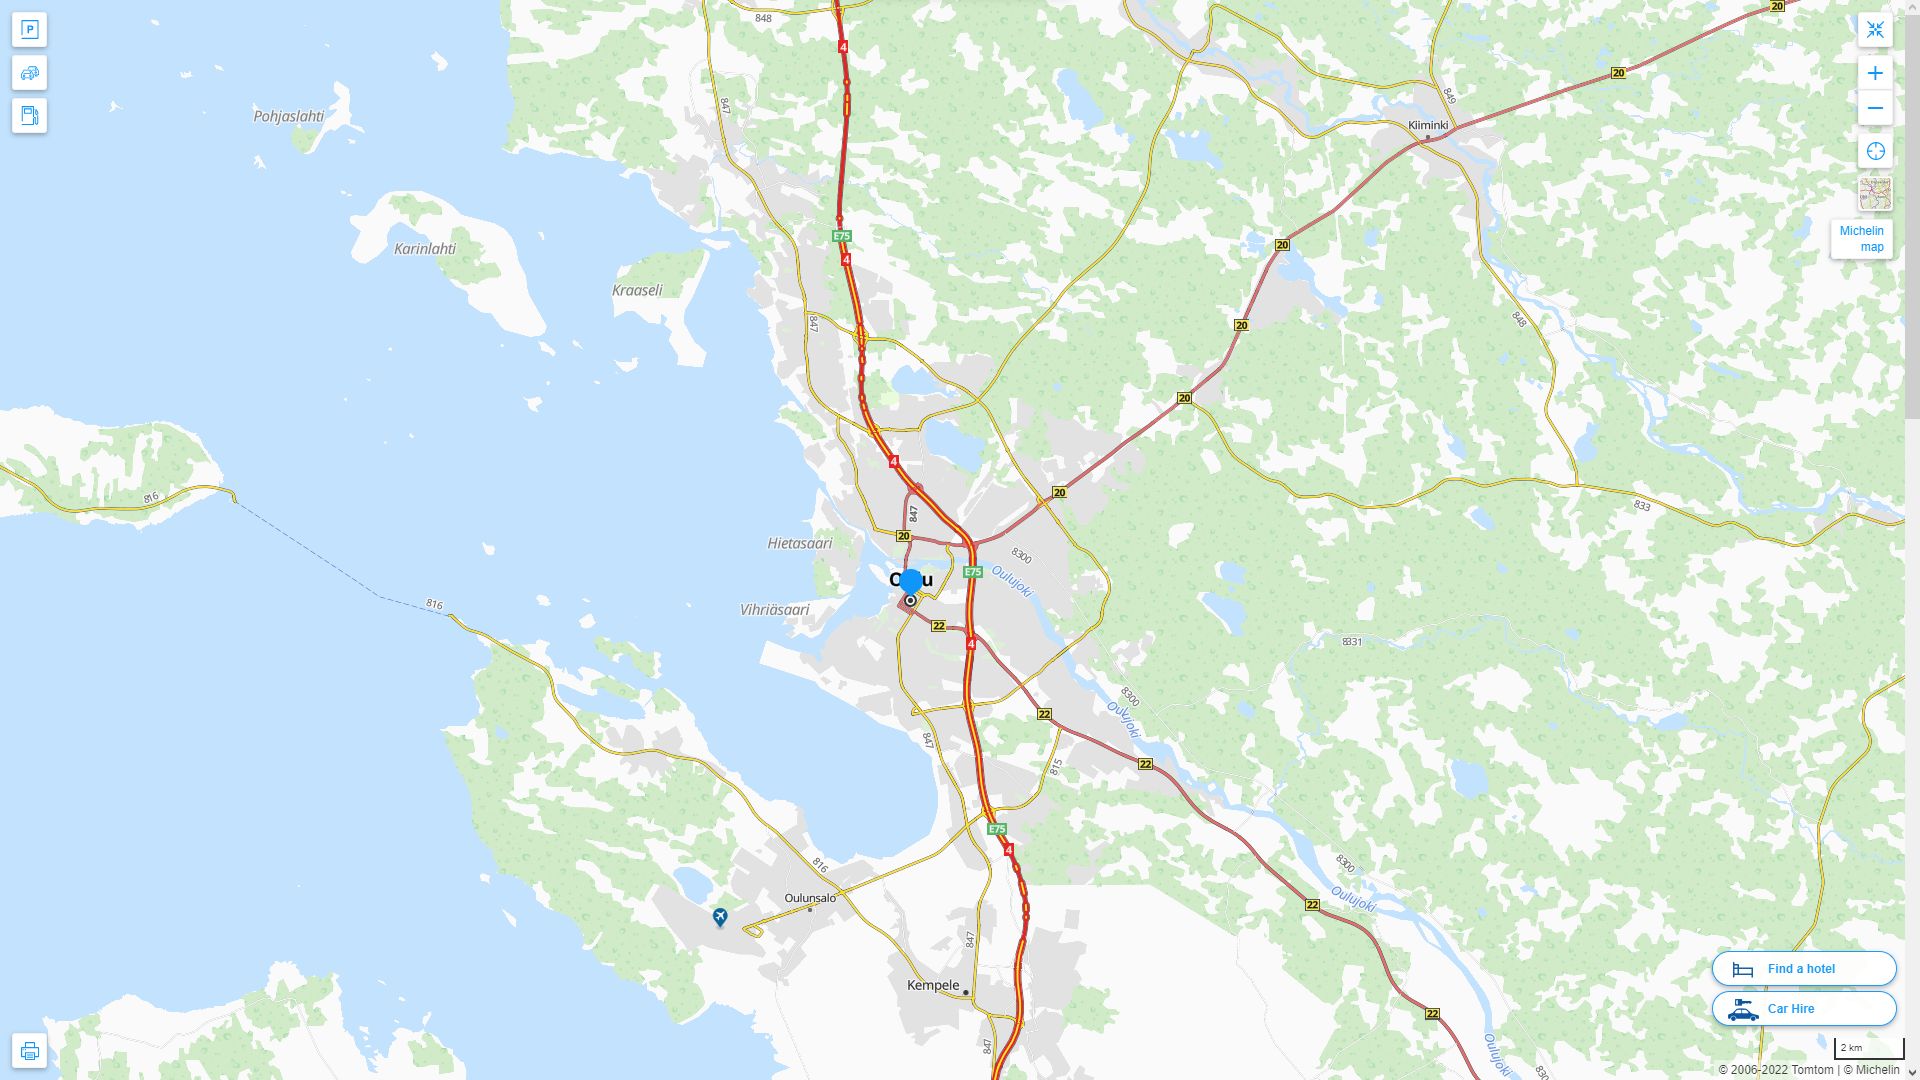 Oulu Highway and Road Map